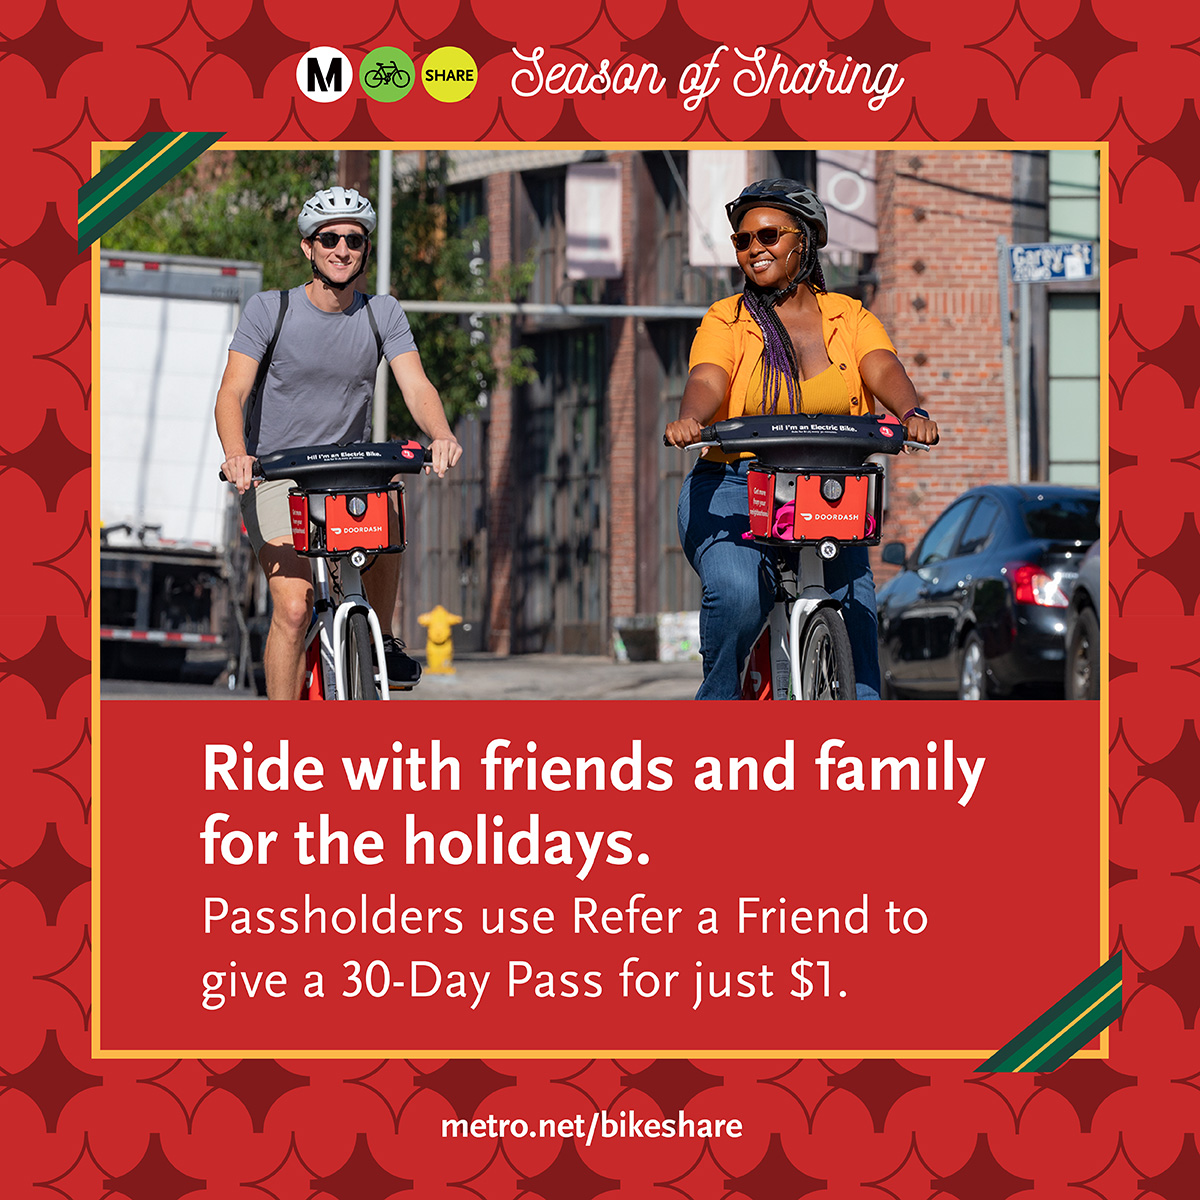 Ride with friends and family for the holidays. Passholders use Refer a Friend to give a 30-Day Pass for just $1. Learn more ow.ly/sIY650QiwYS